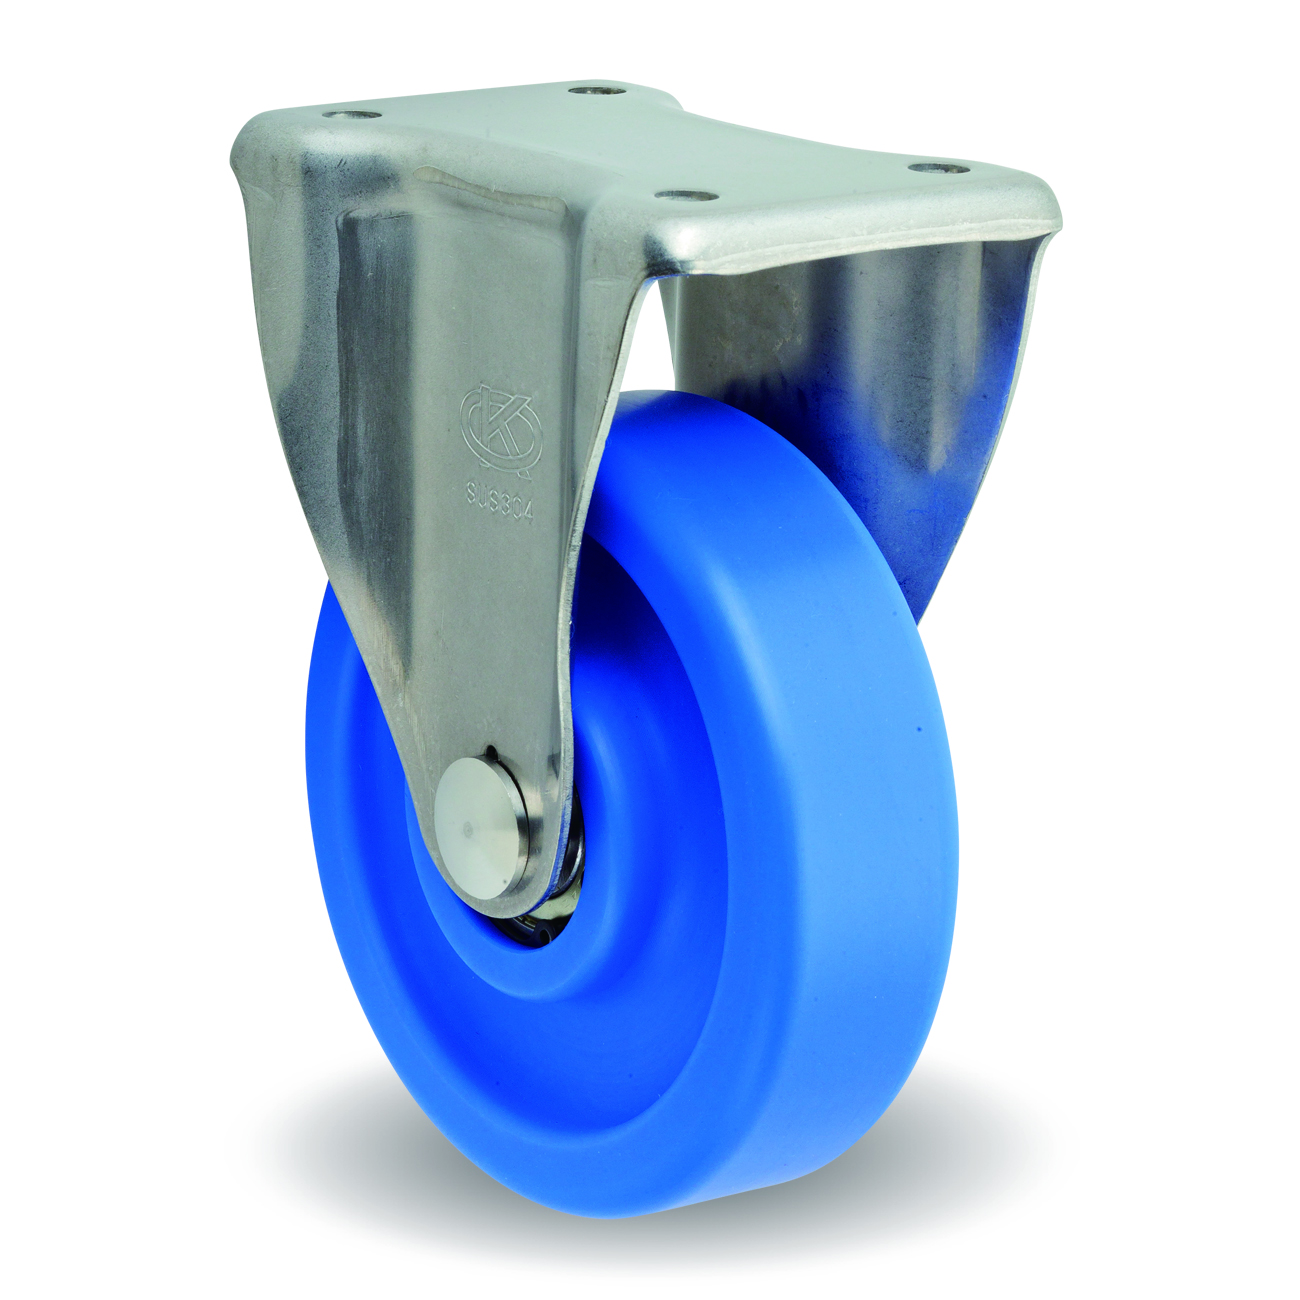 Casters - MC nylon with fixed plate and support, KS, MCB/KS series.